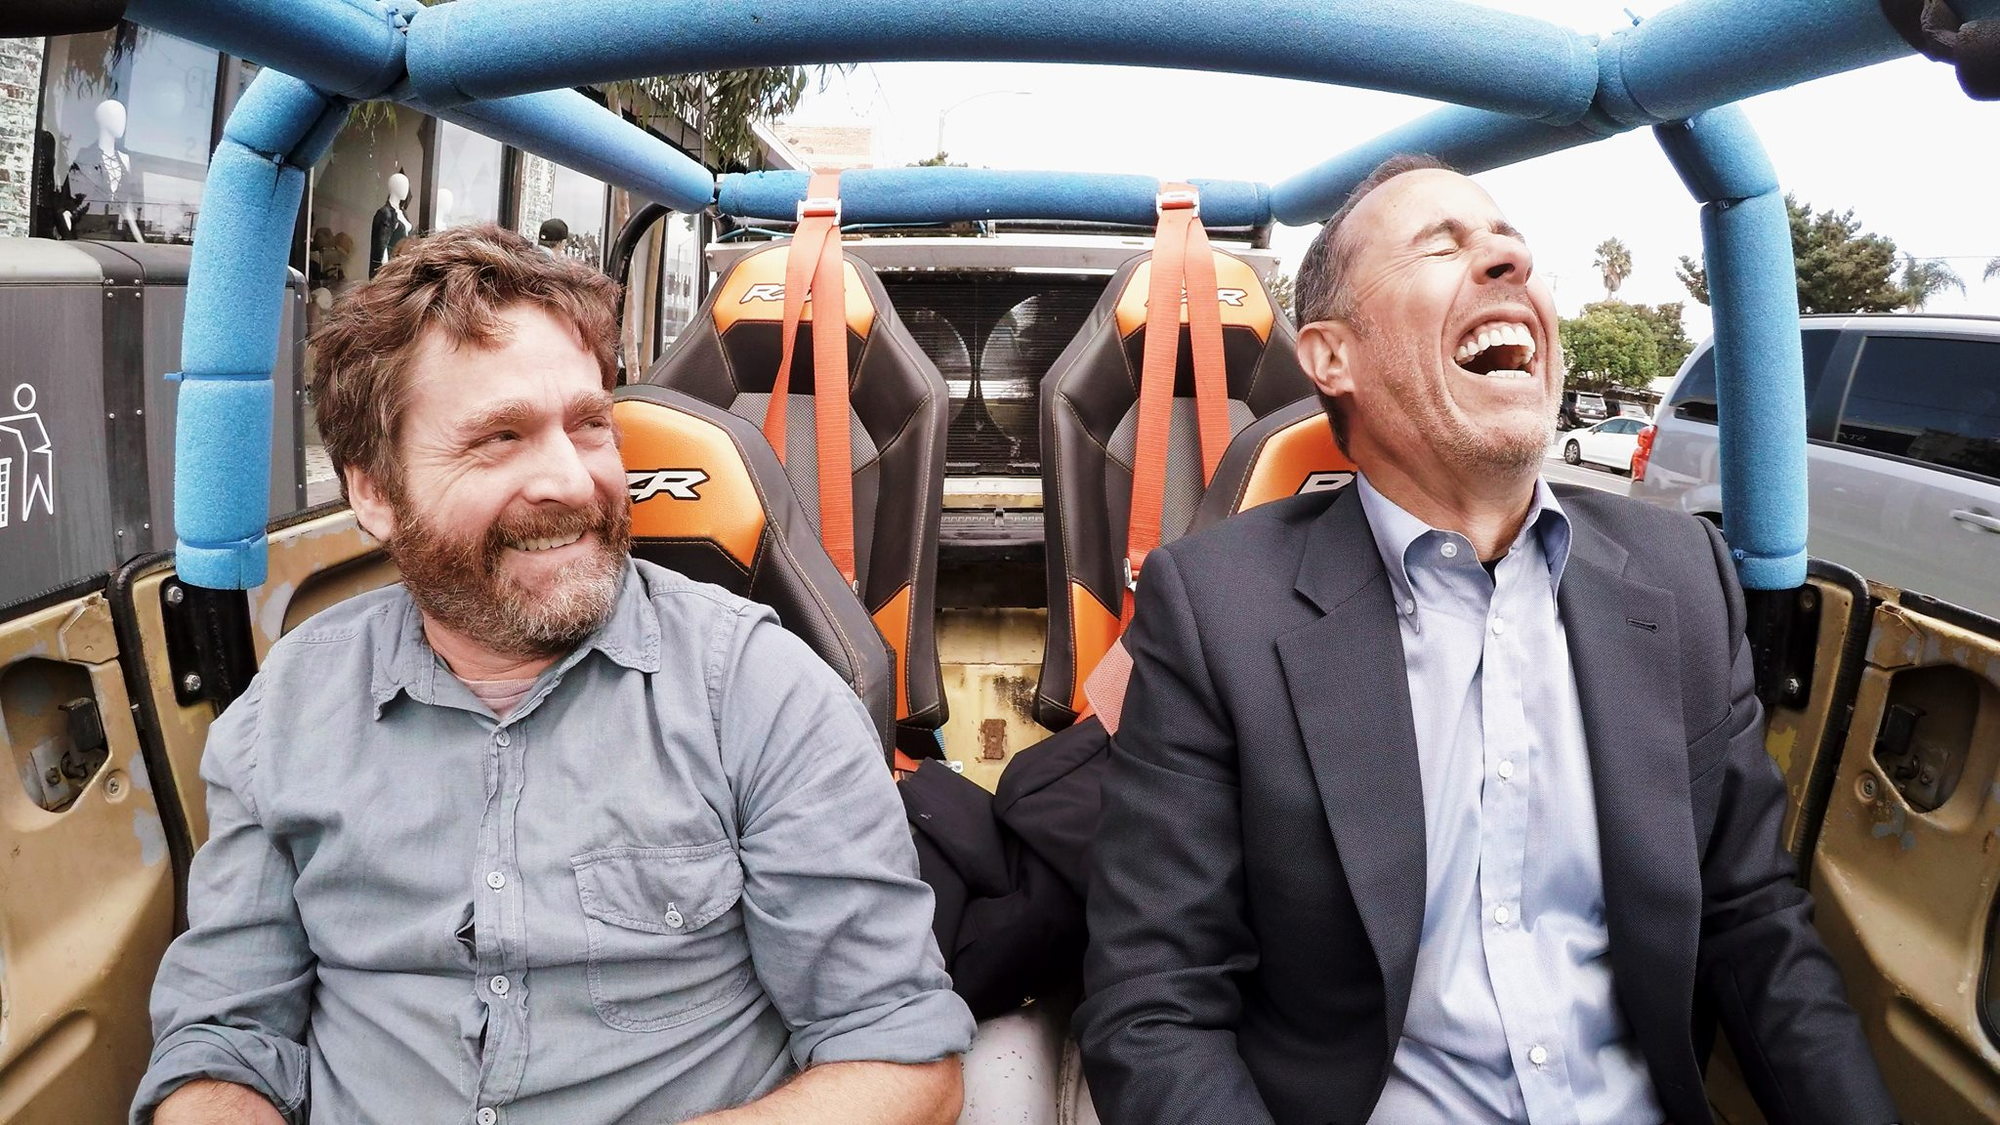 Jerry Seinfeld and Zach Galifainakis on Season 6 of Comedians in Cars Getting Coffee